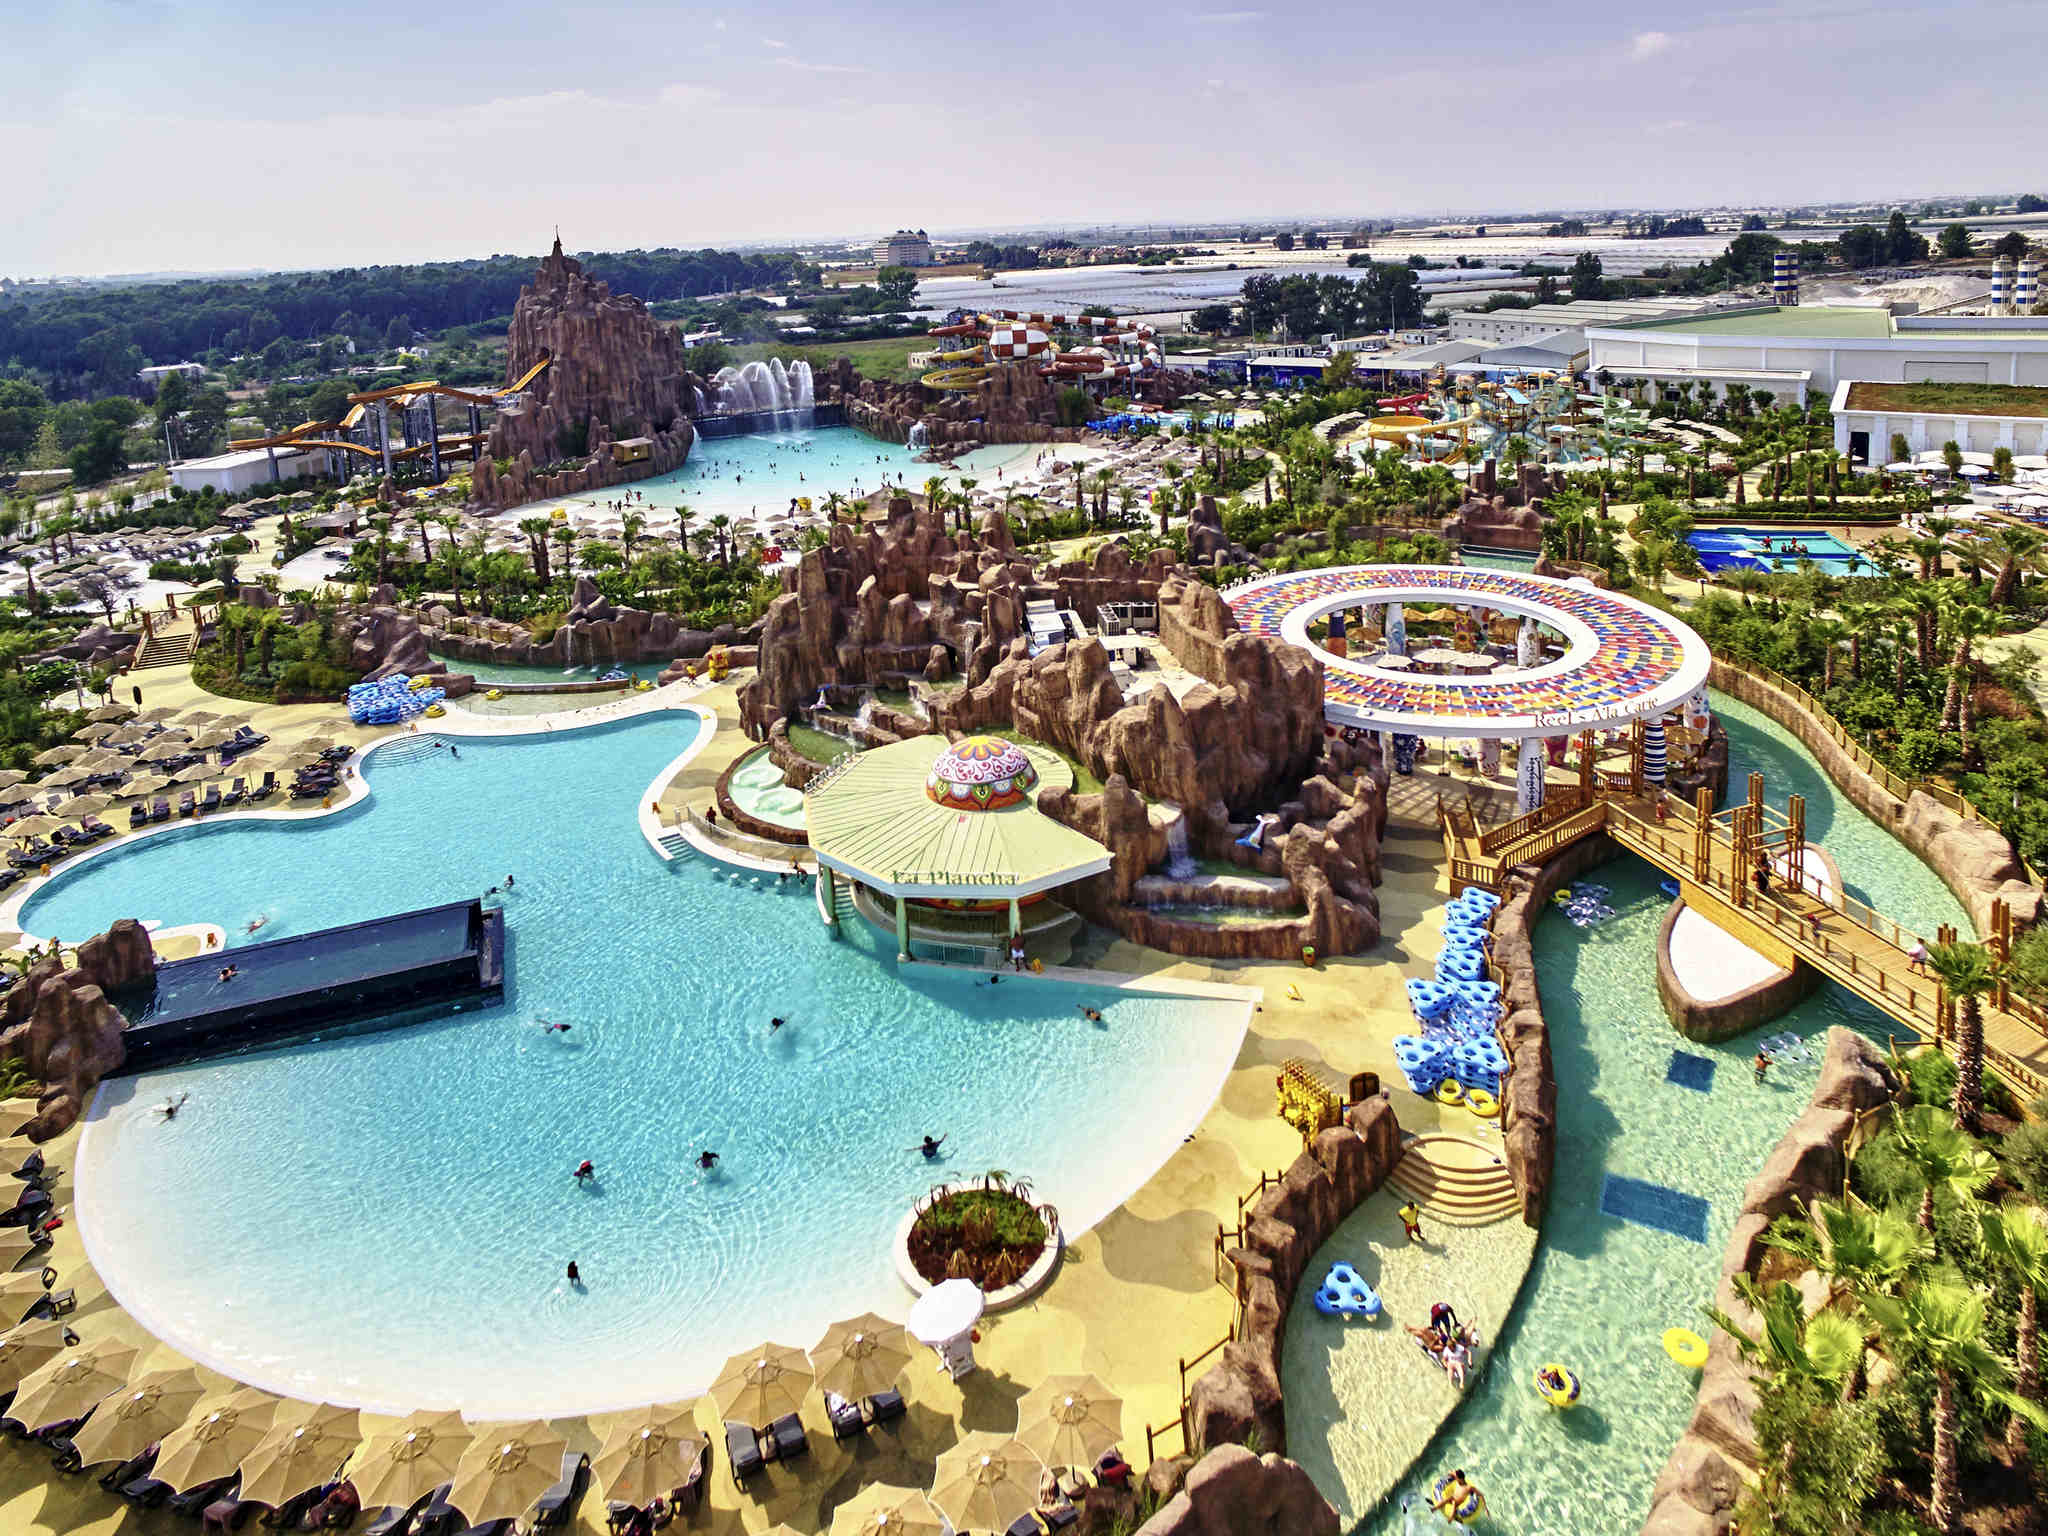 THE LAND OF LEGENDS THEME PARK & HOTEL